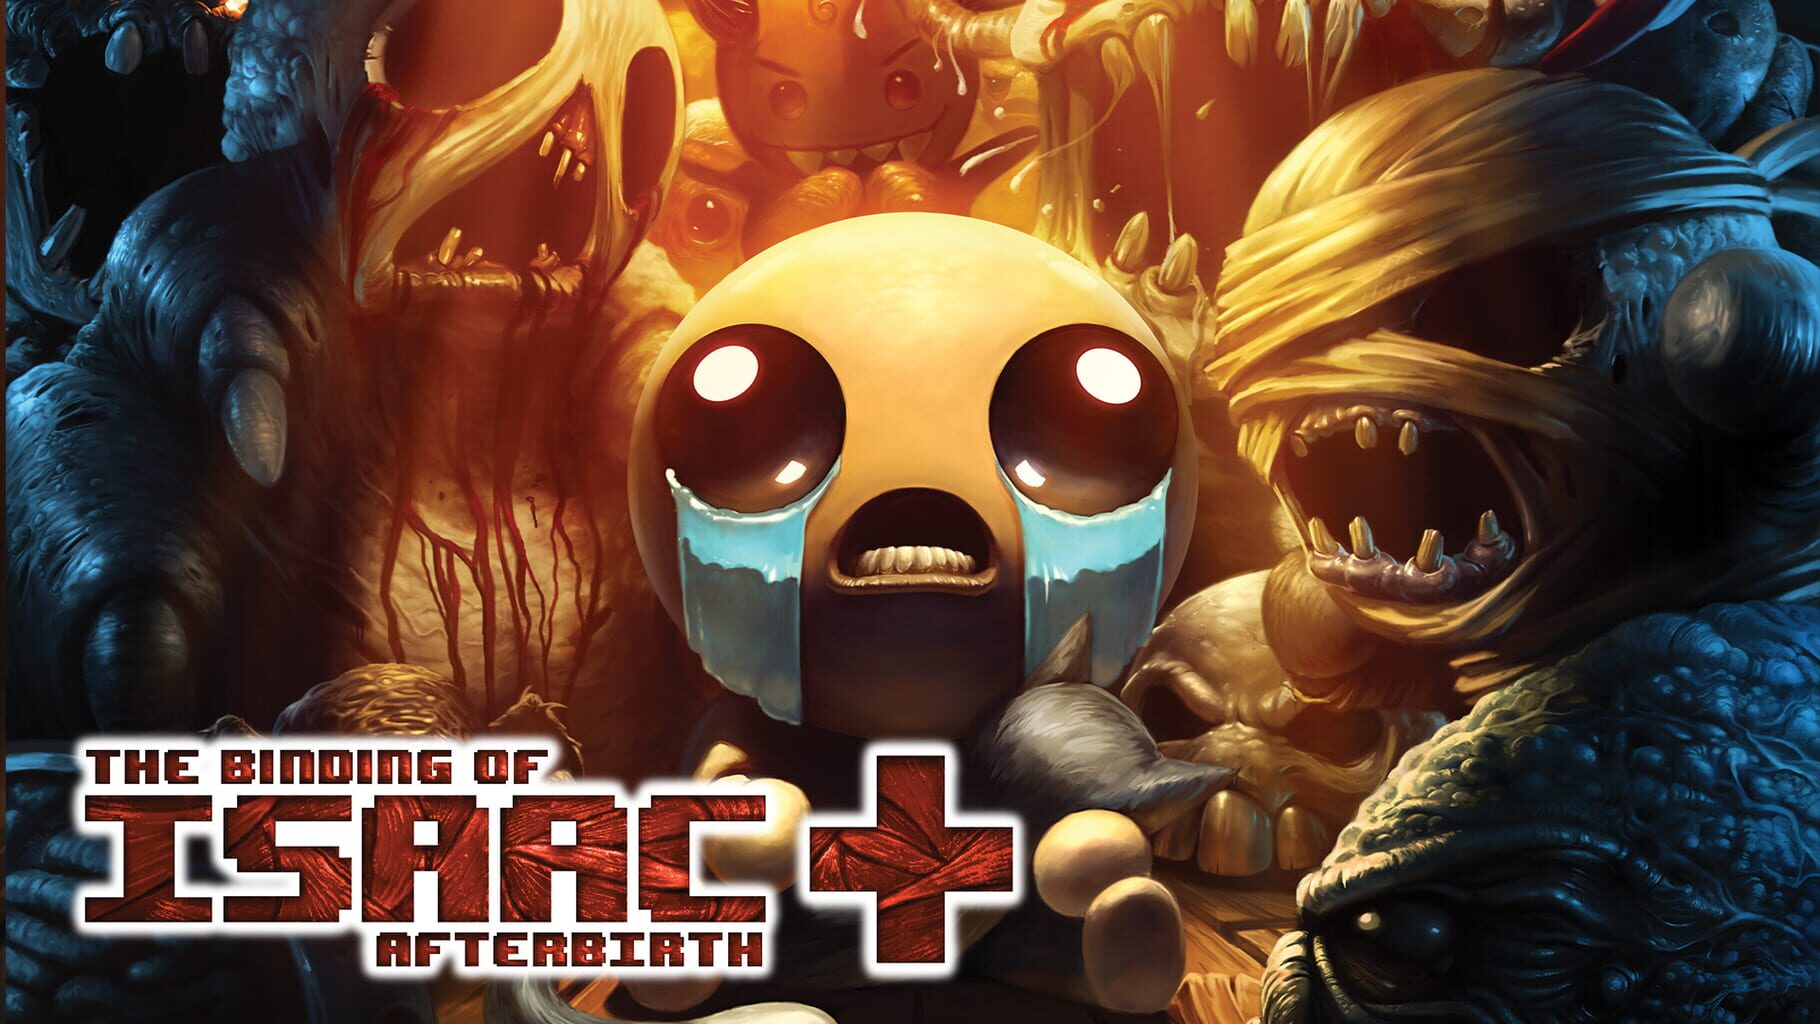 Arte - The Binding of Isaac: Afterbirth+